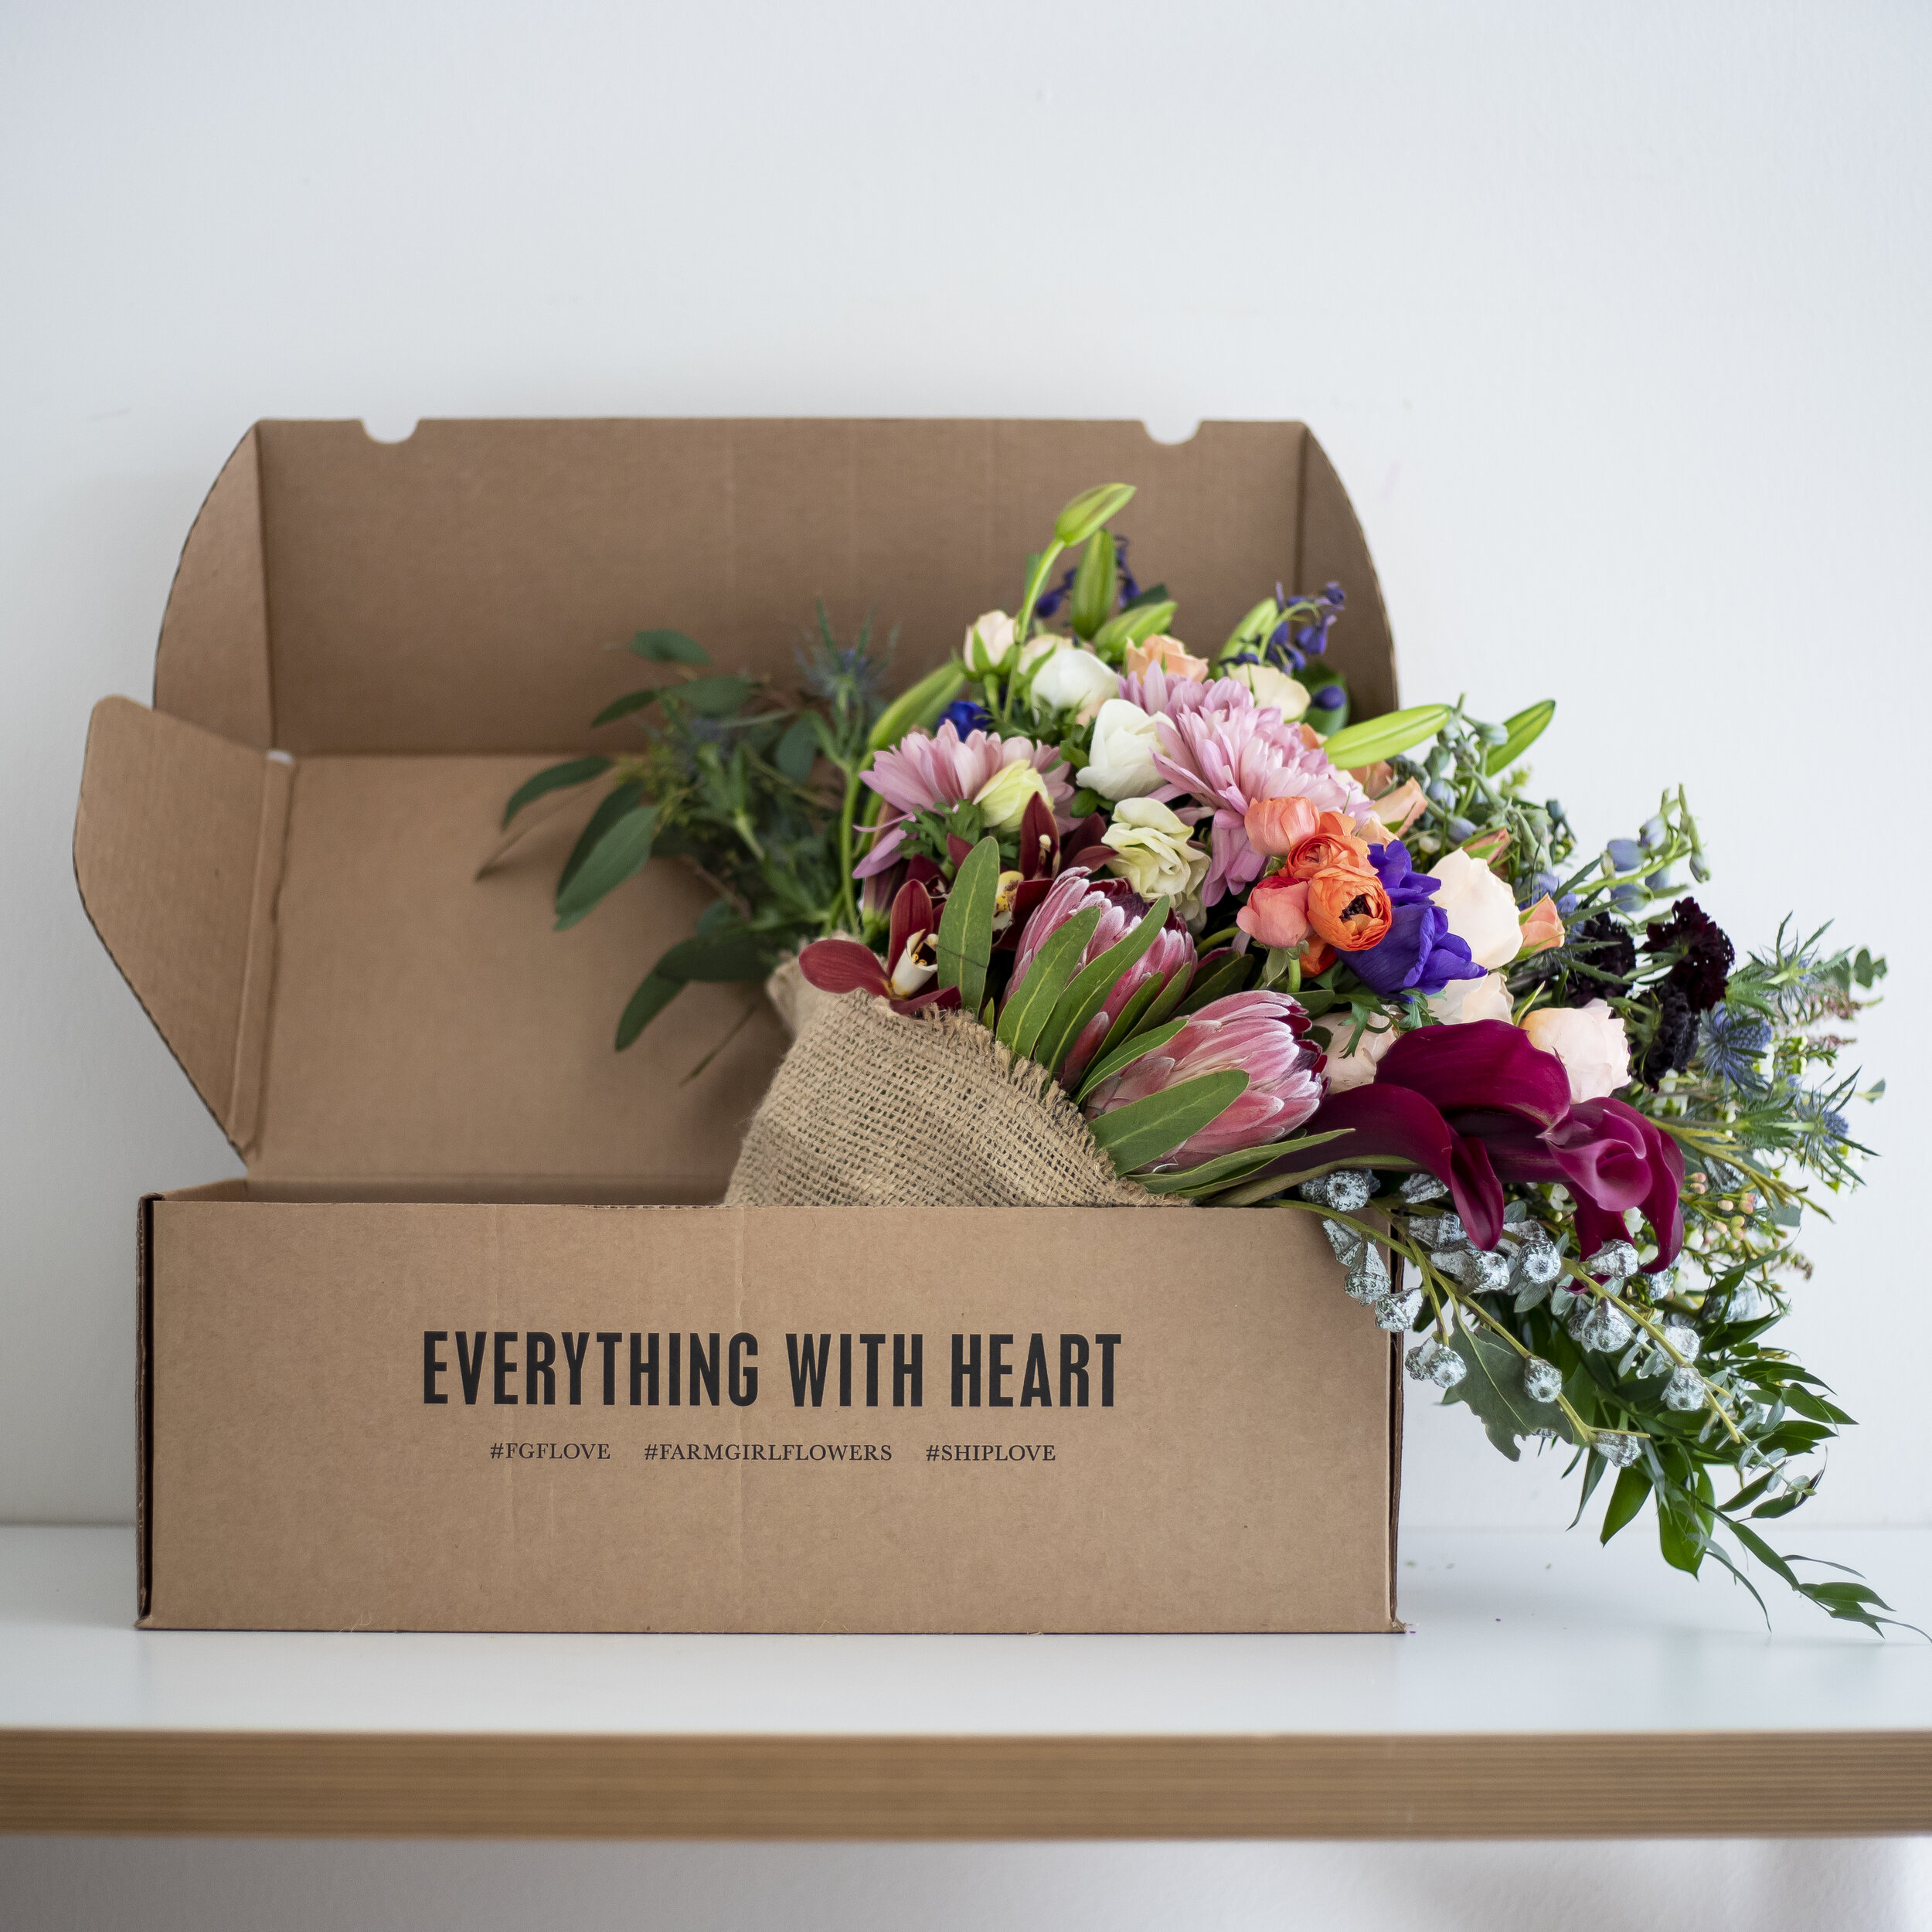 A bouquet of mixed pink, burgundy, and purple flowers wrapped in burlap, sitting in a cardboard box